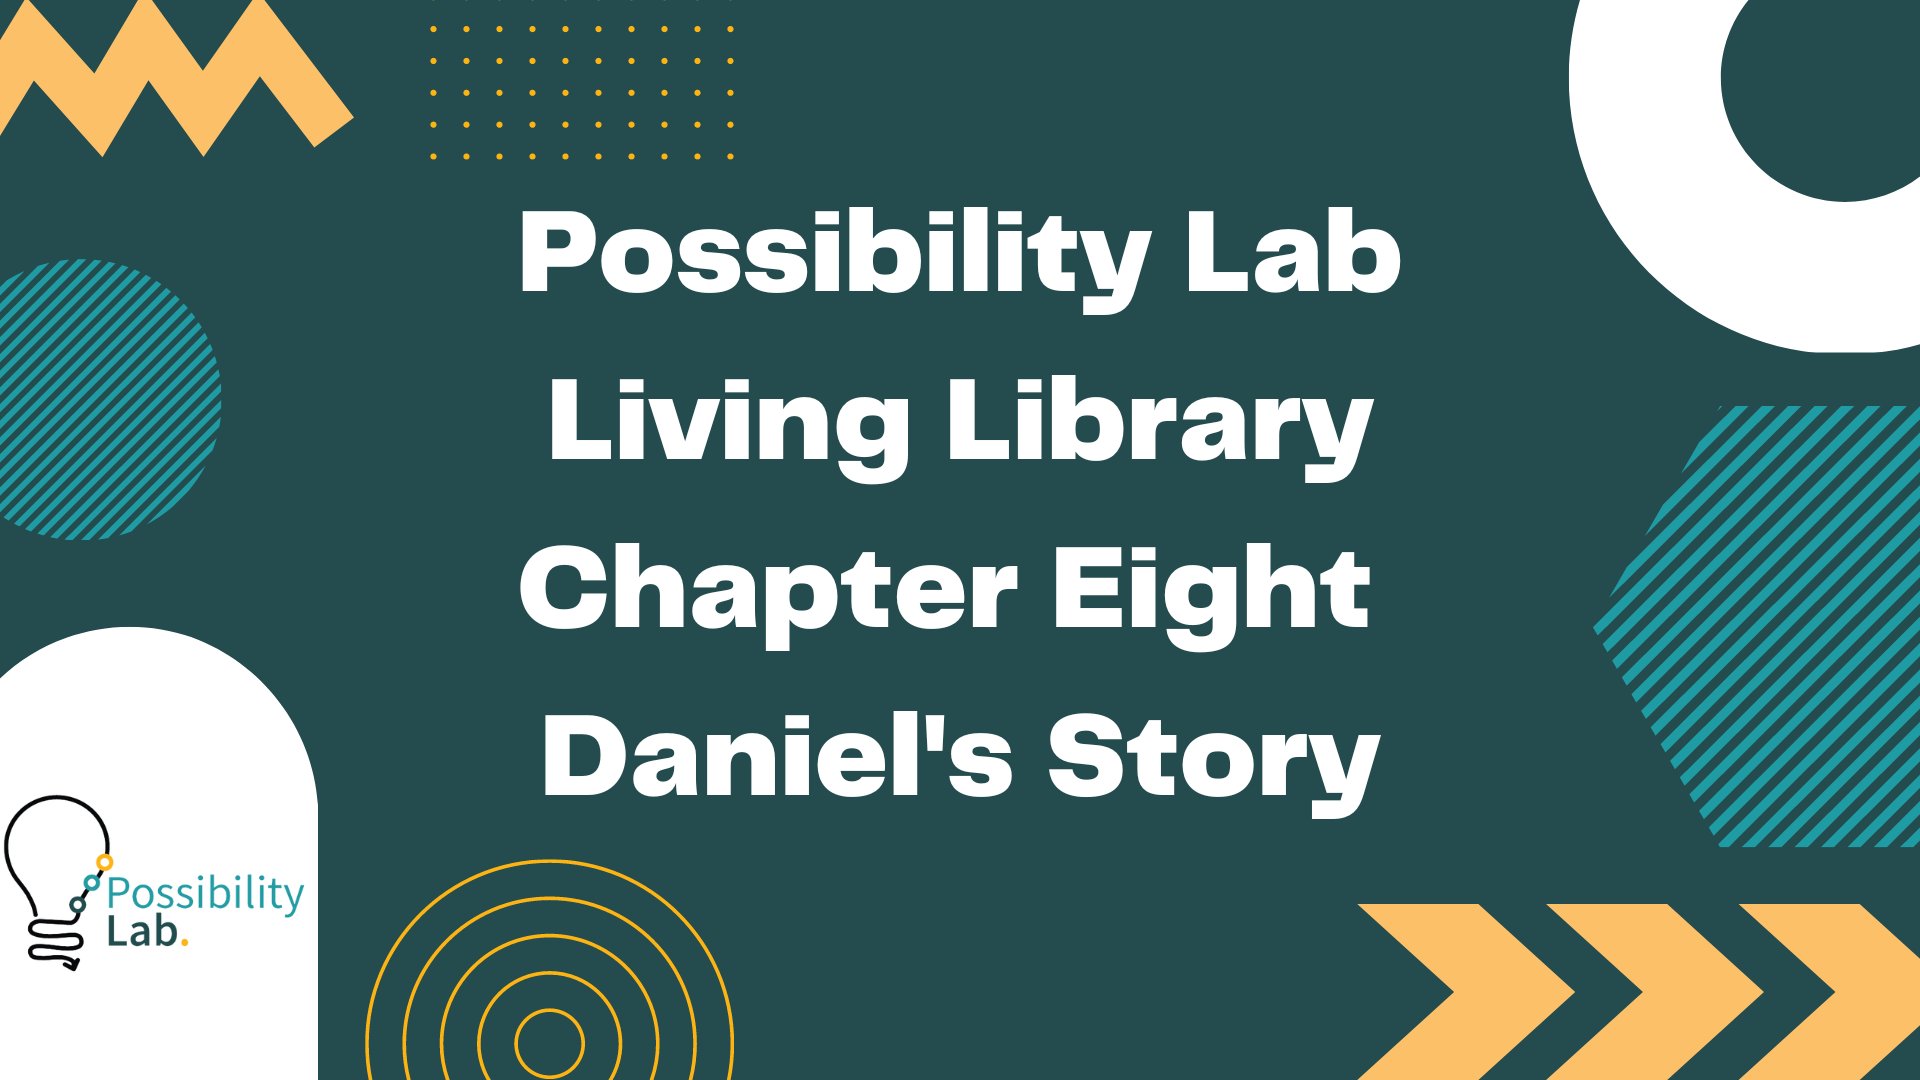 A slide from our living library videos. It has a green background and squiggle designs in white, lighter green and orange. The possibility lab logo is on the bottom left and text on the slide reads Possibility Lab Living Library Chapter Eight Daniel's Story